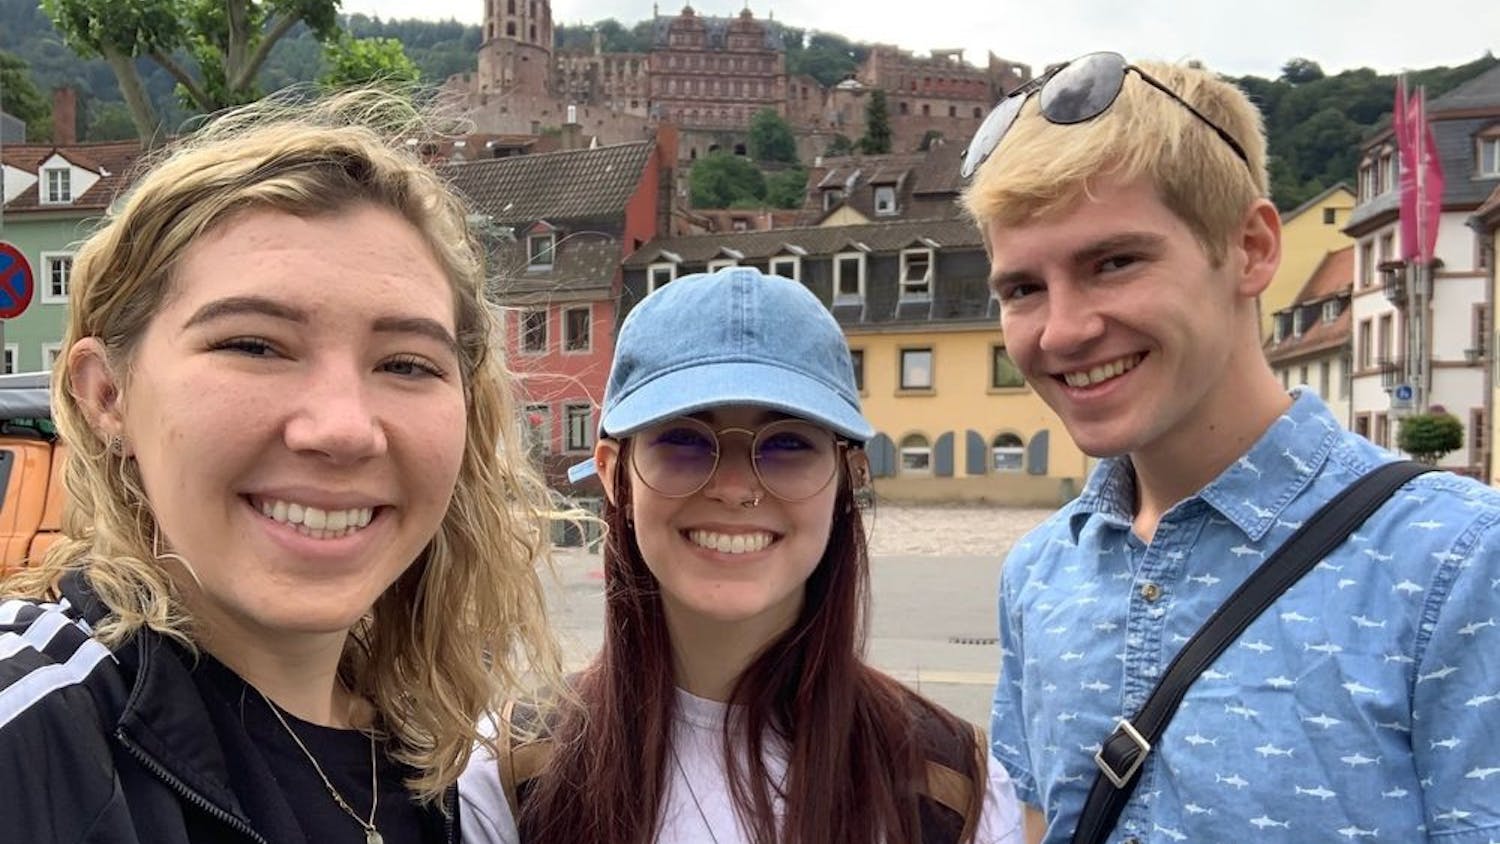 Kelly Cavaliere currently studying abroad for 6 months in Germany at the Universität Mannheim.